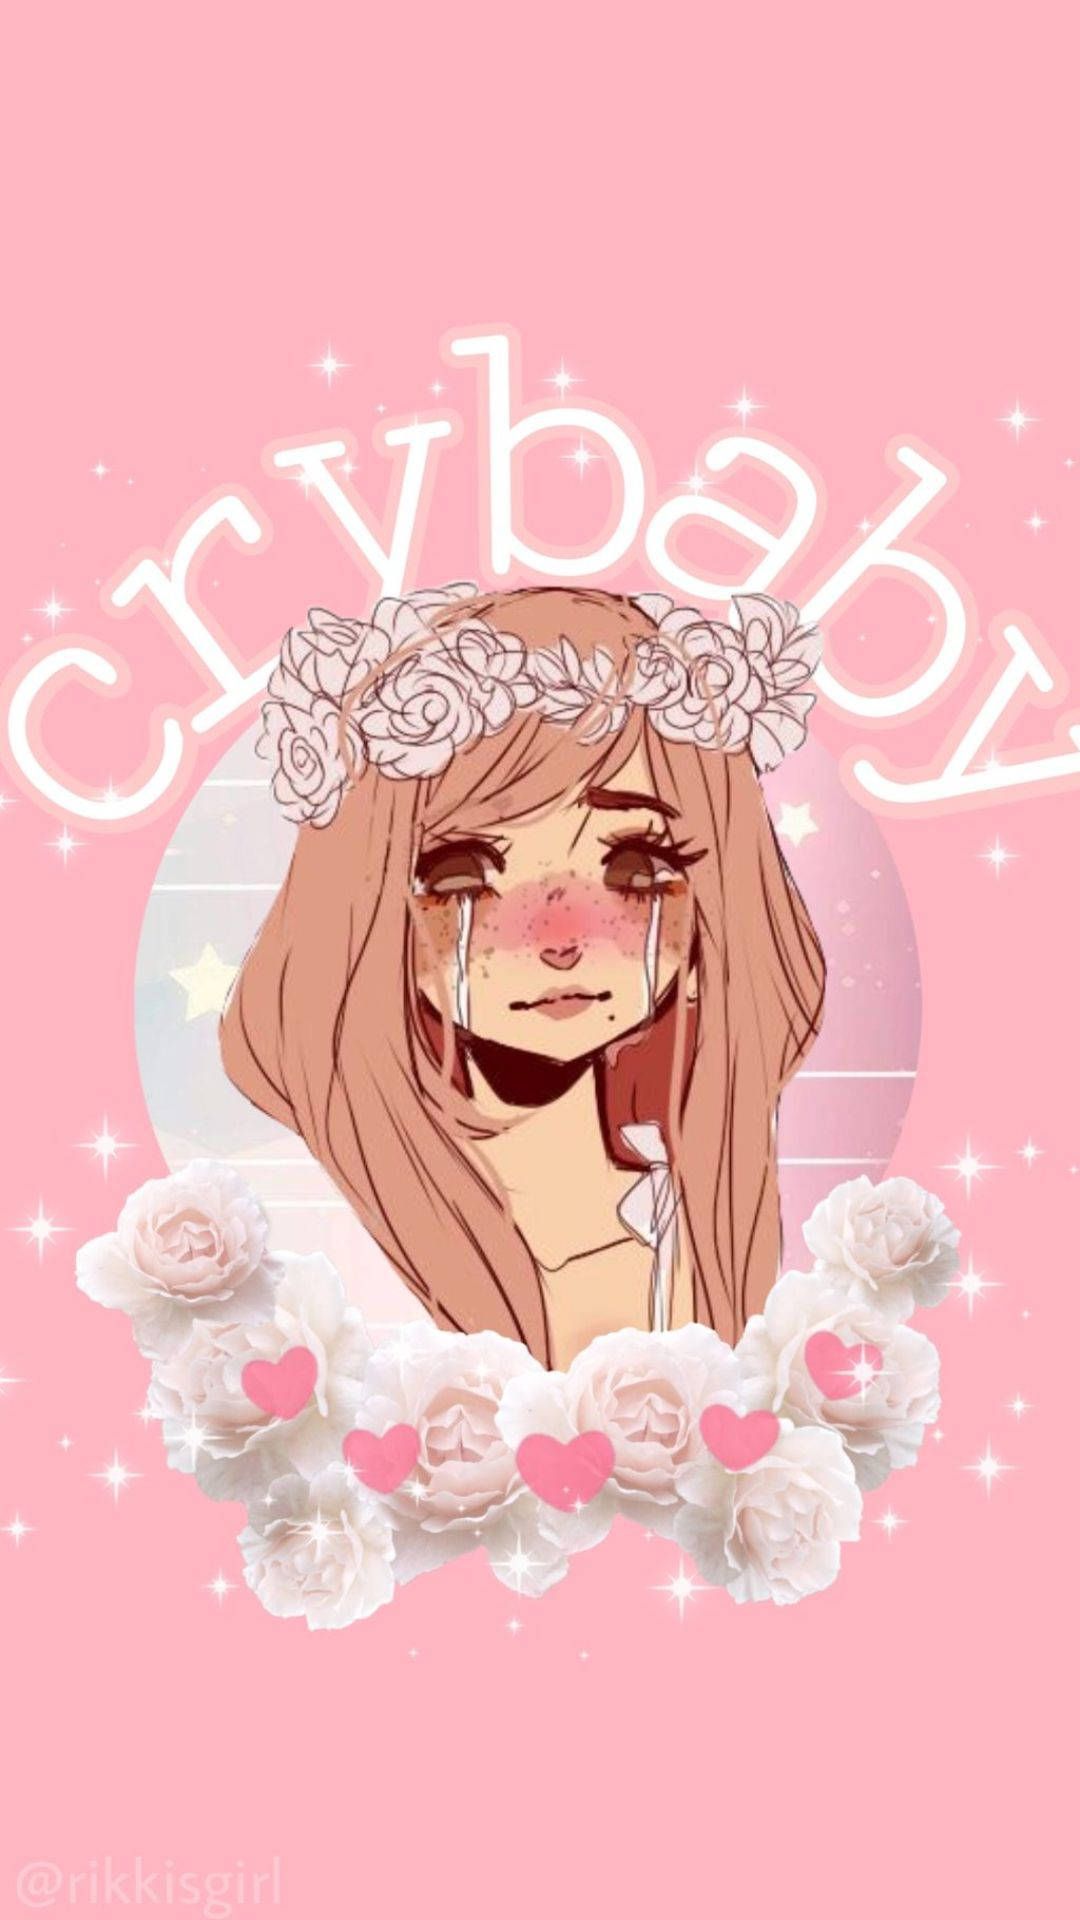 A girl with pink hair and flowers on her face - Profile picture, pink anime